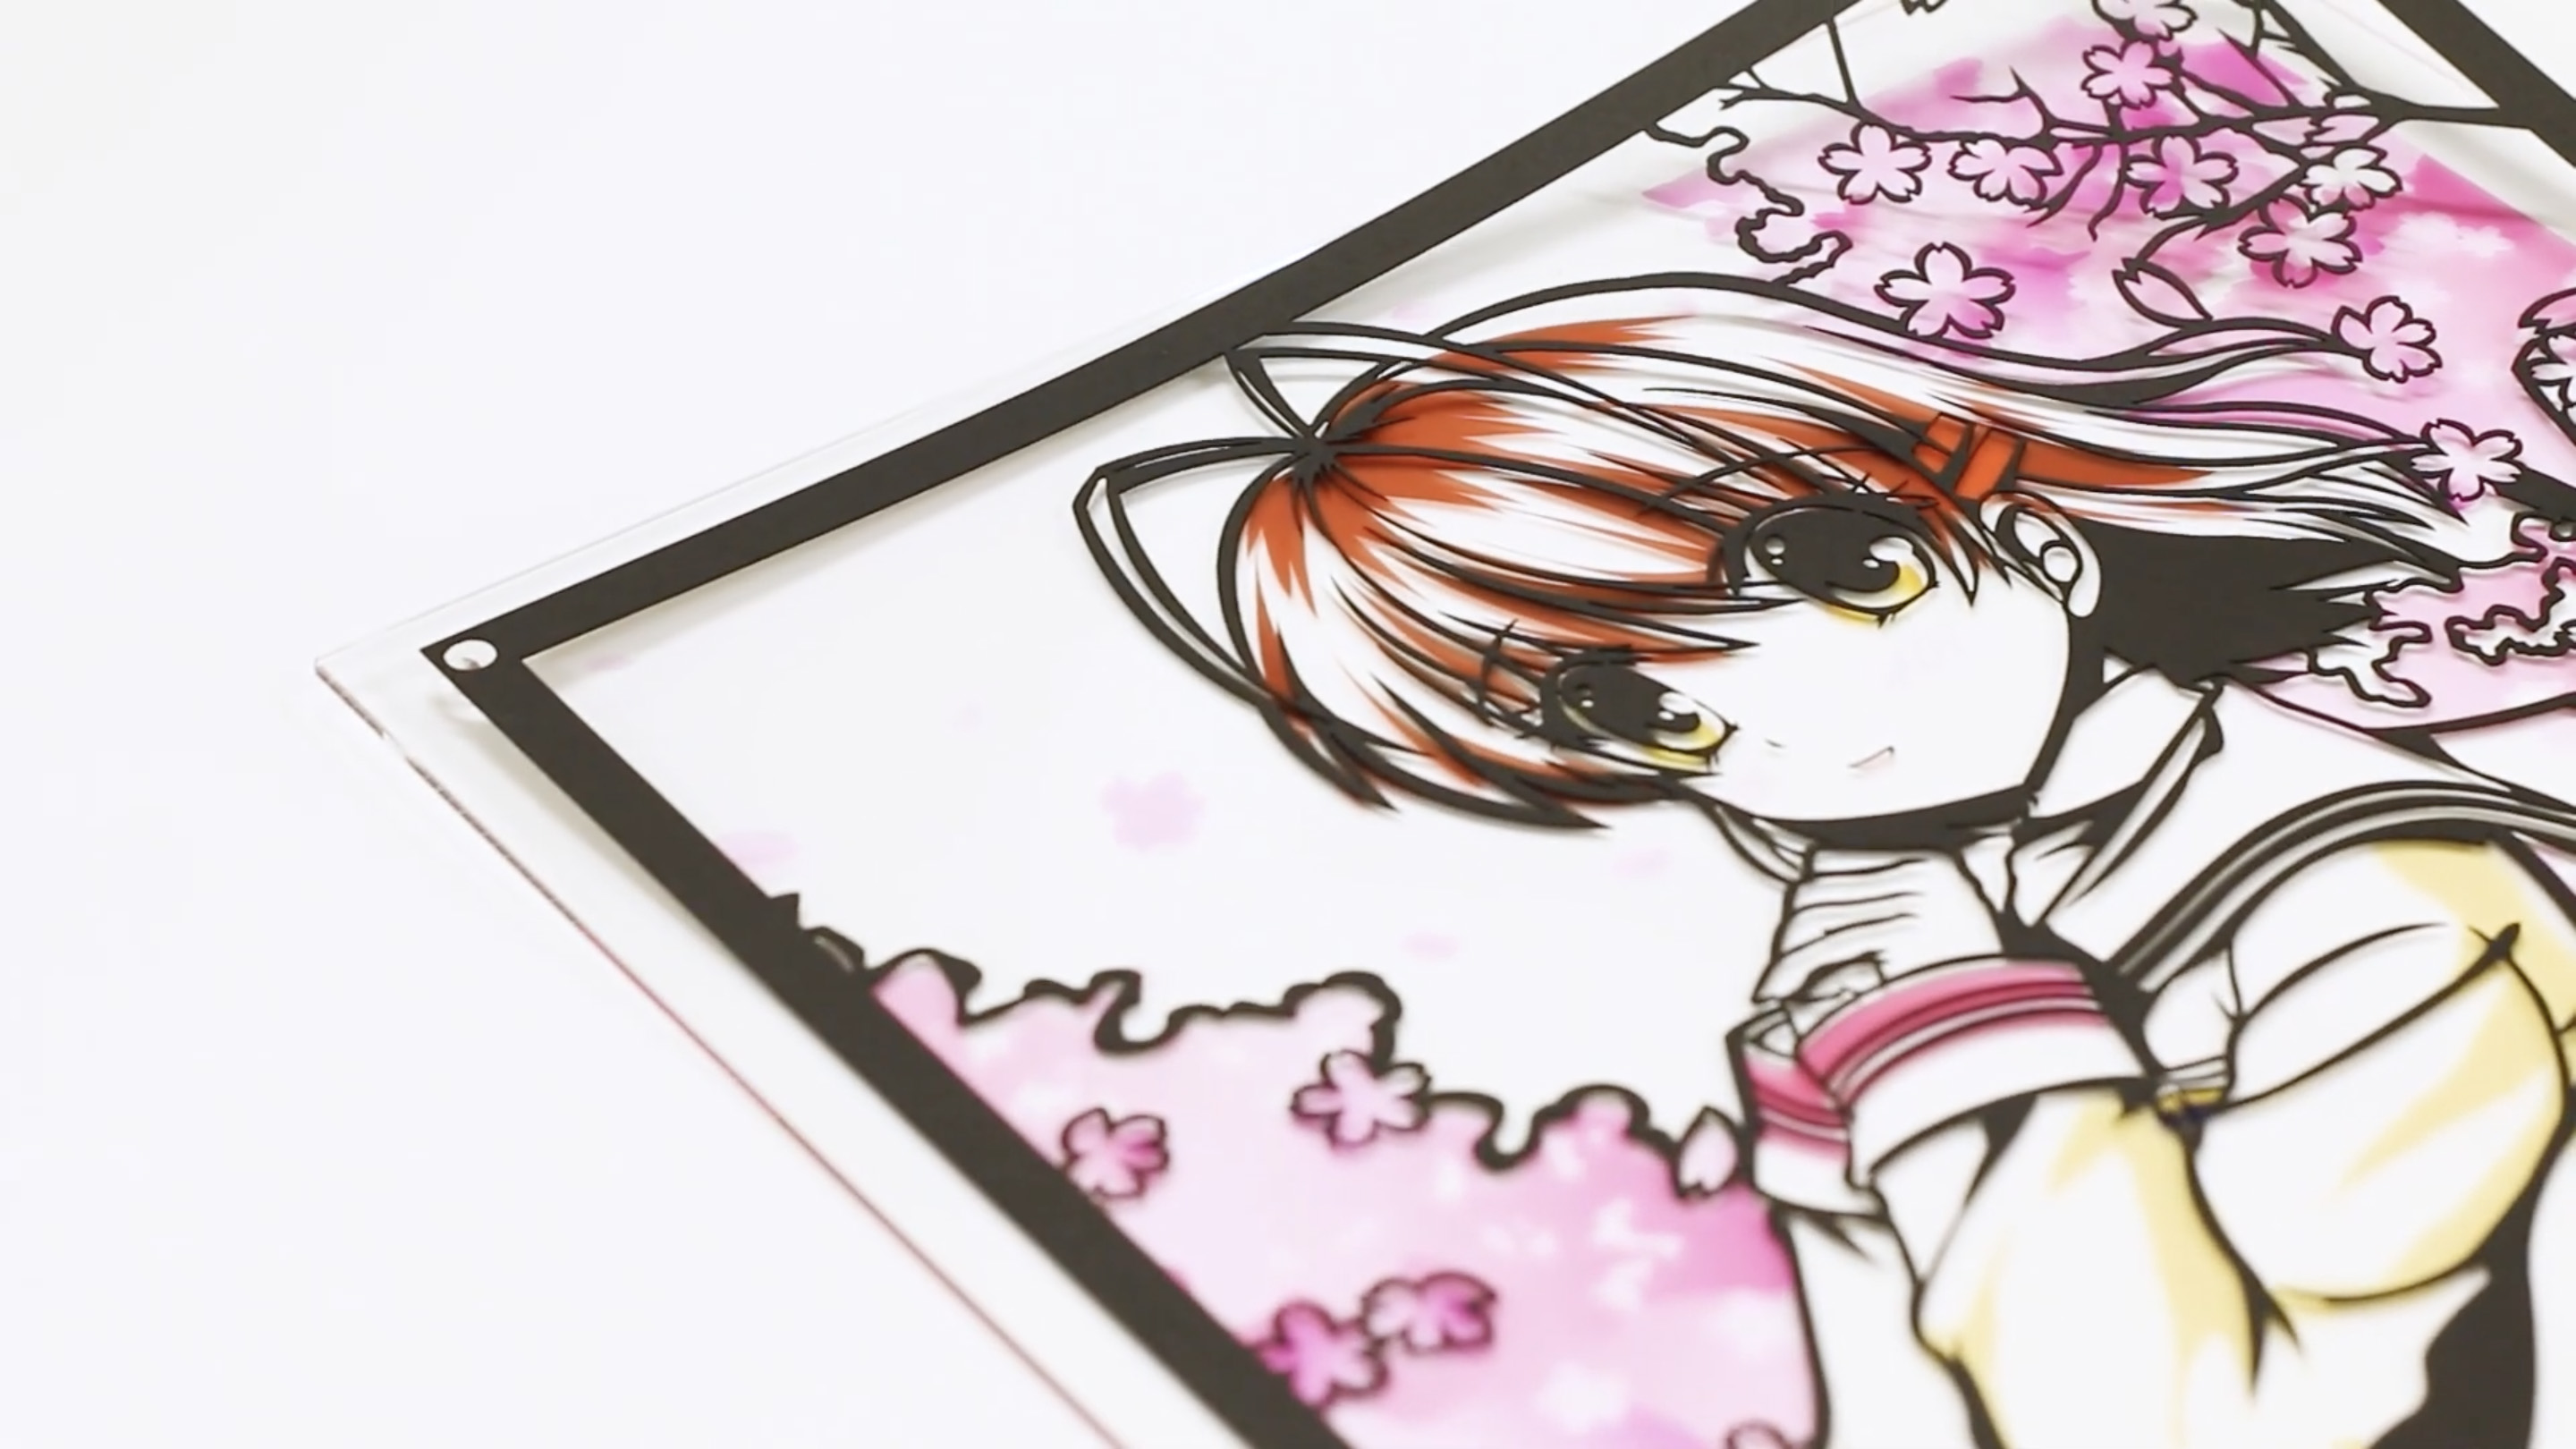 Clannad TV Anime Celebrates 15th Anniversary With Traditional Nagisa Paper Cutting